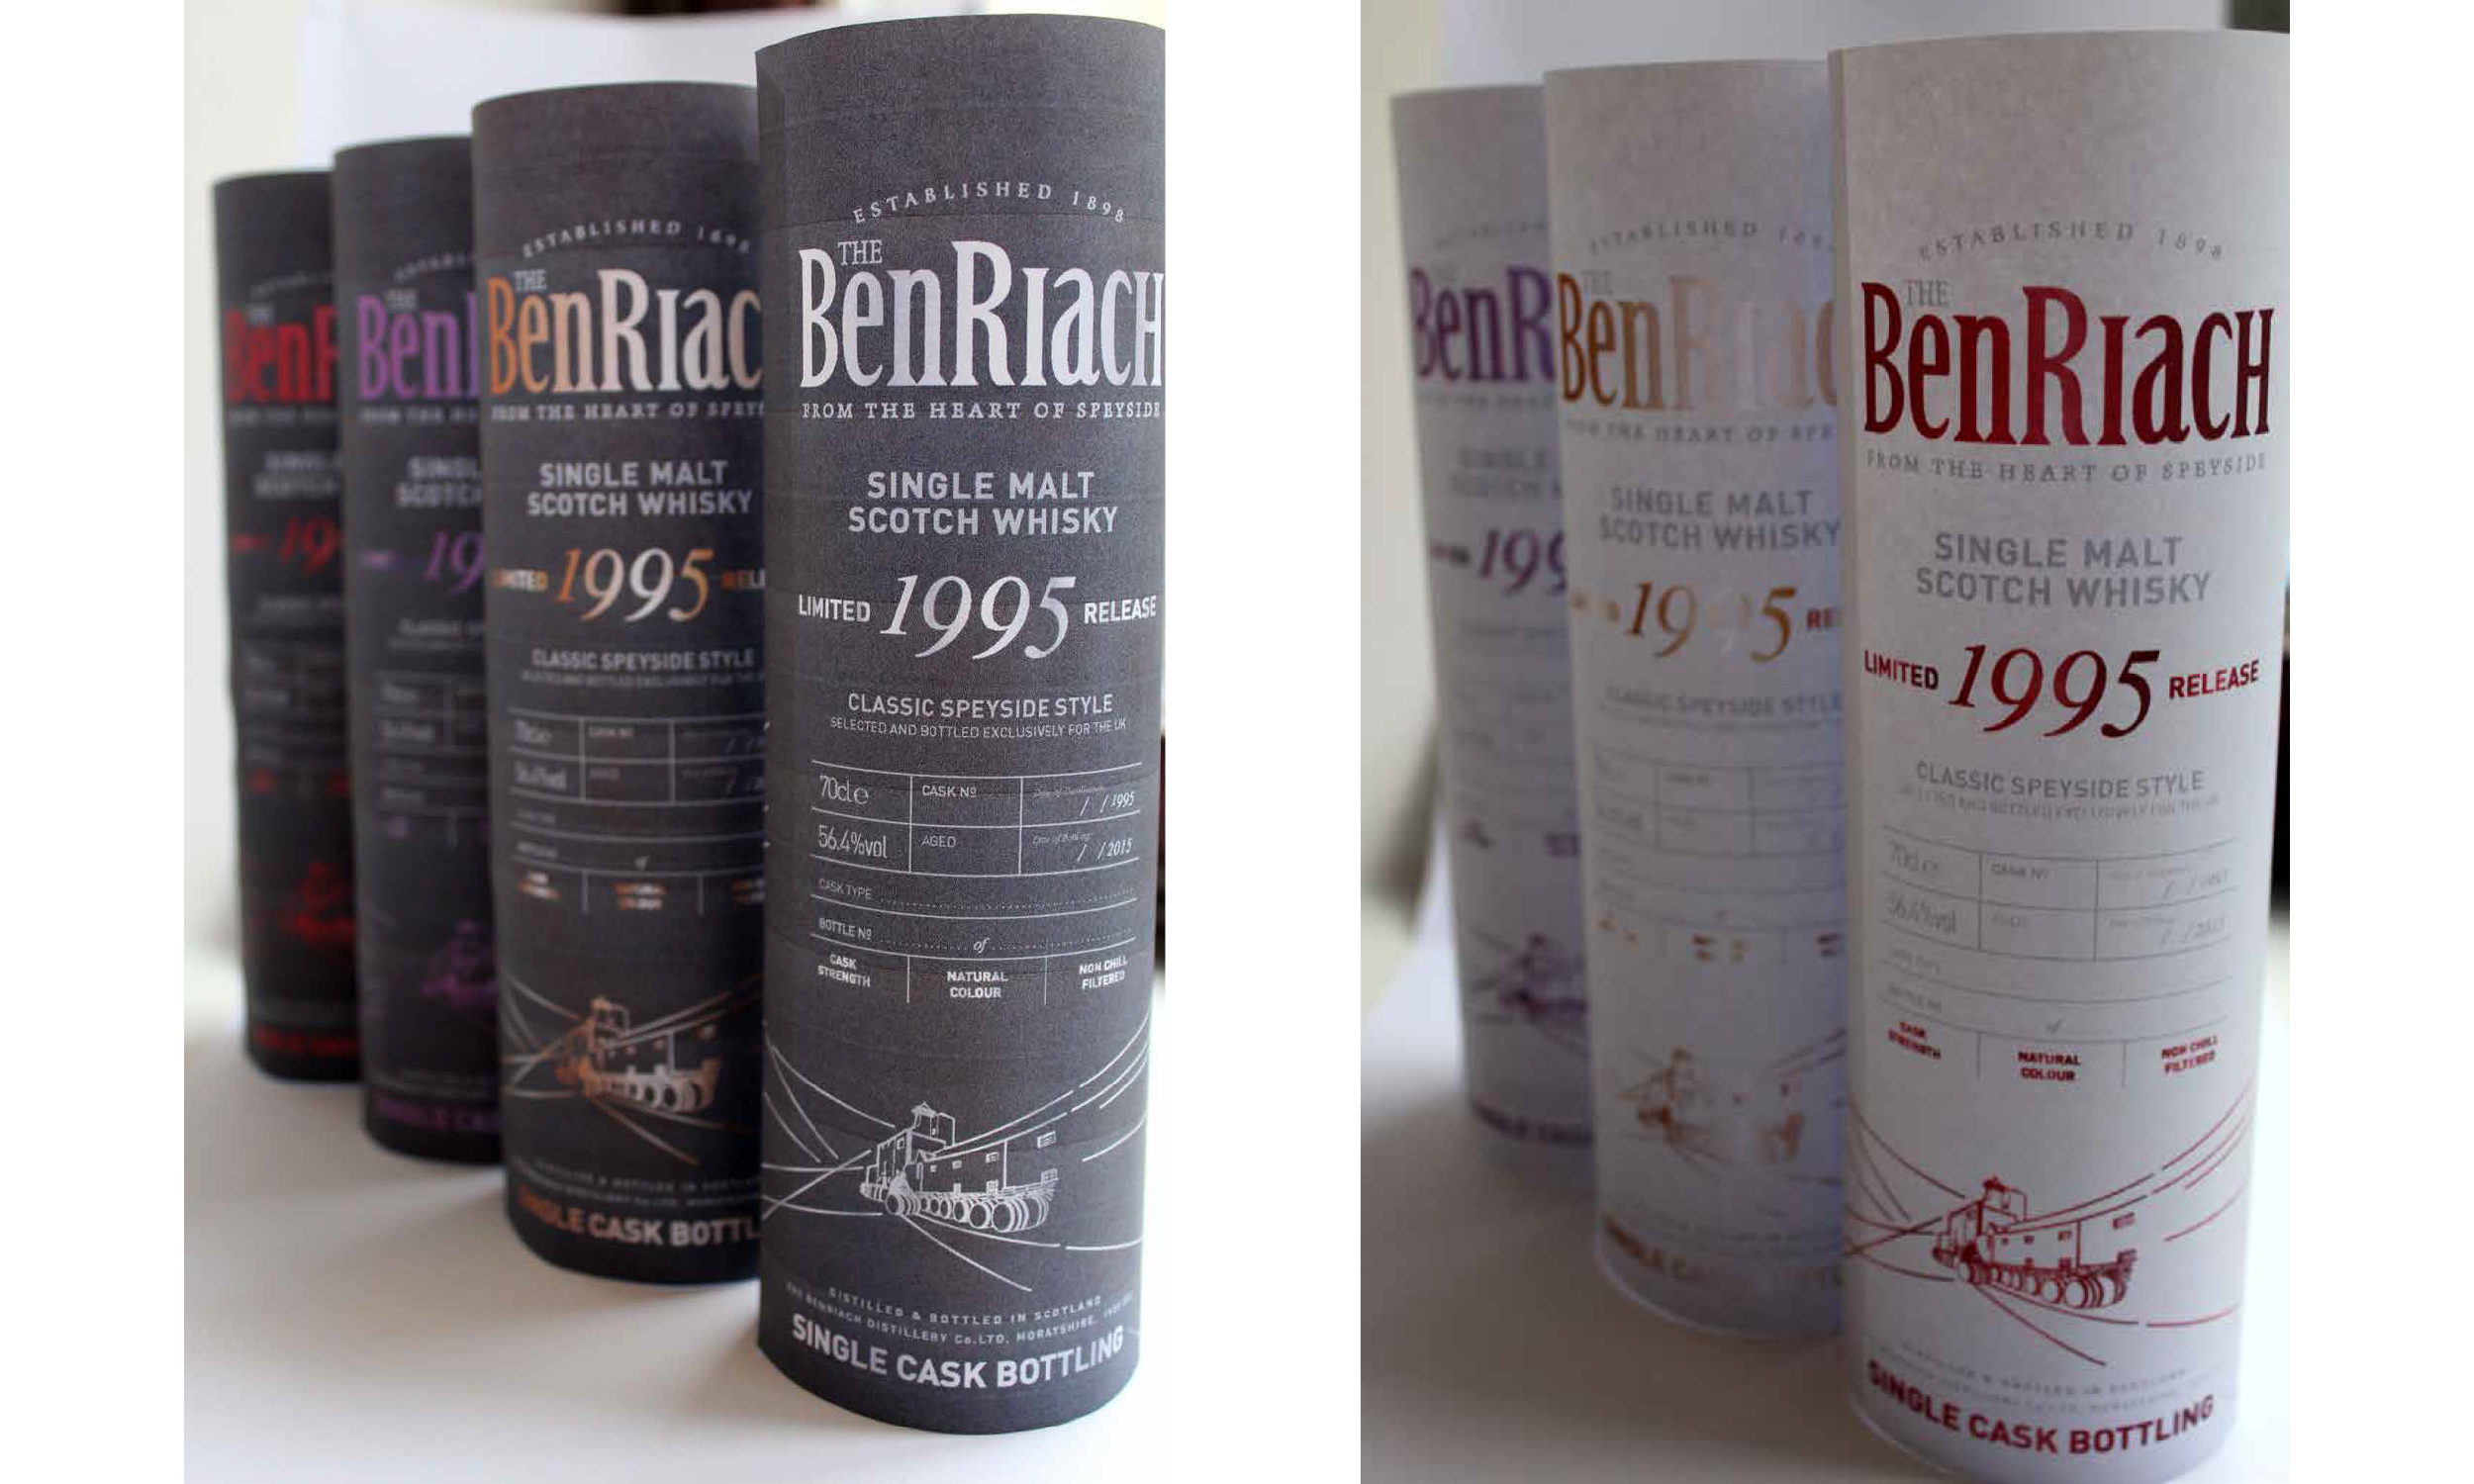  BenRiach-Whisky-Packaging-Design-Paper-Mock-Up